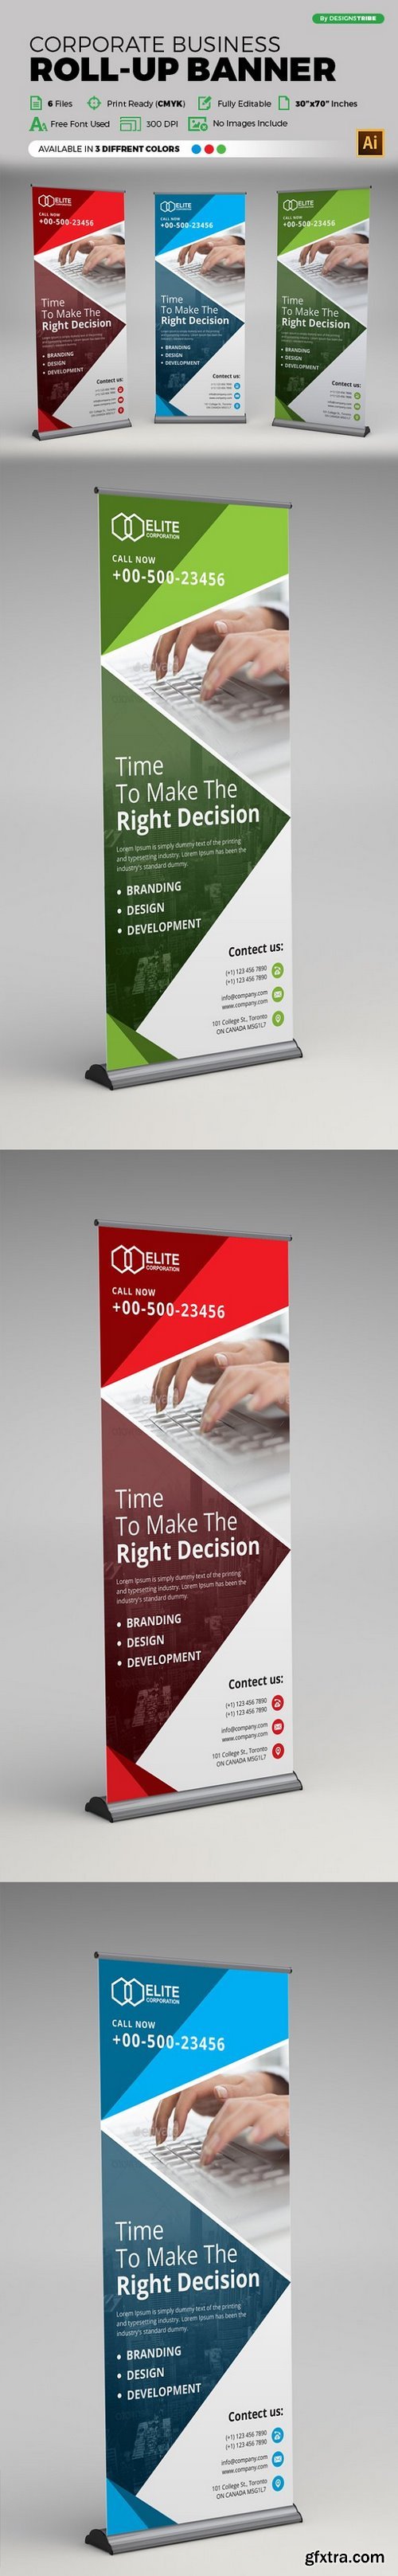 CM - Corporate Roll up Banner 1440770